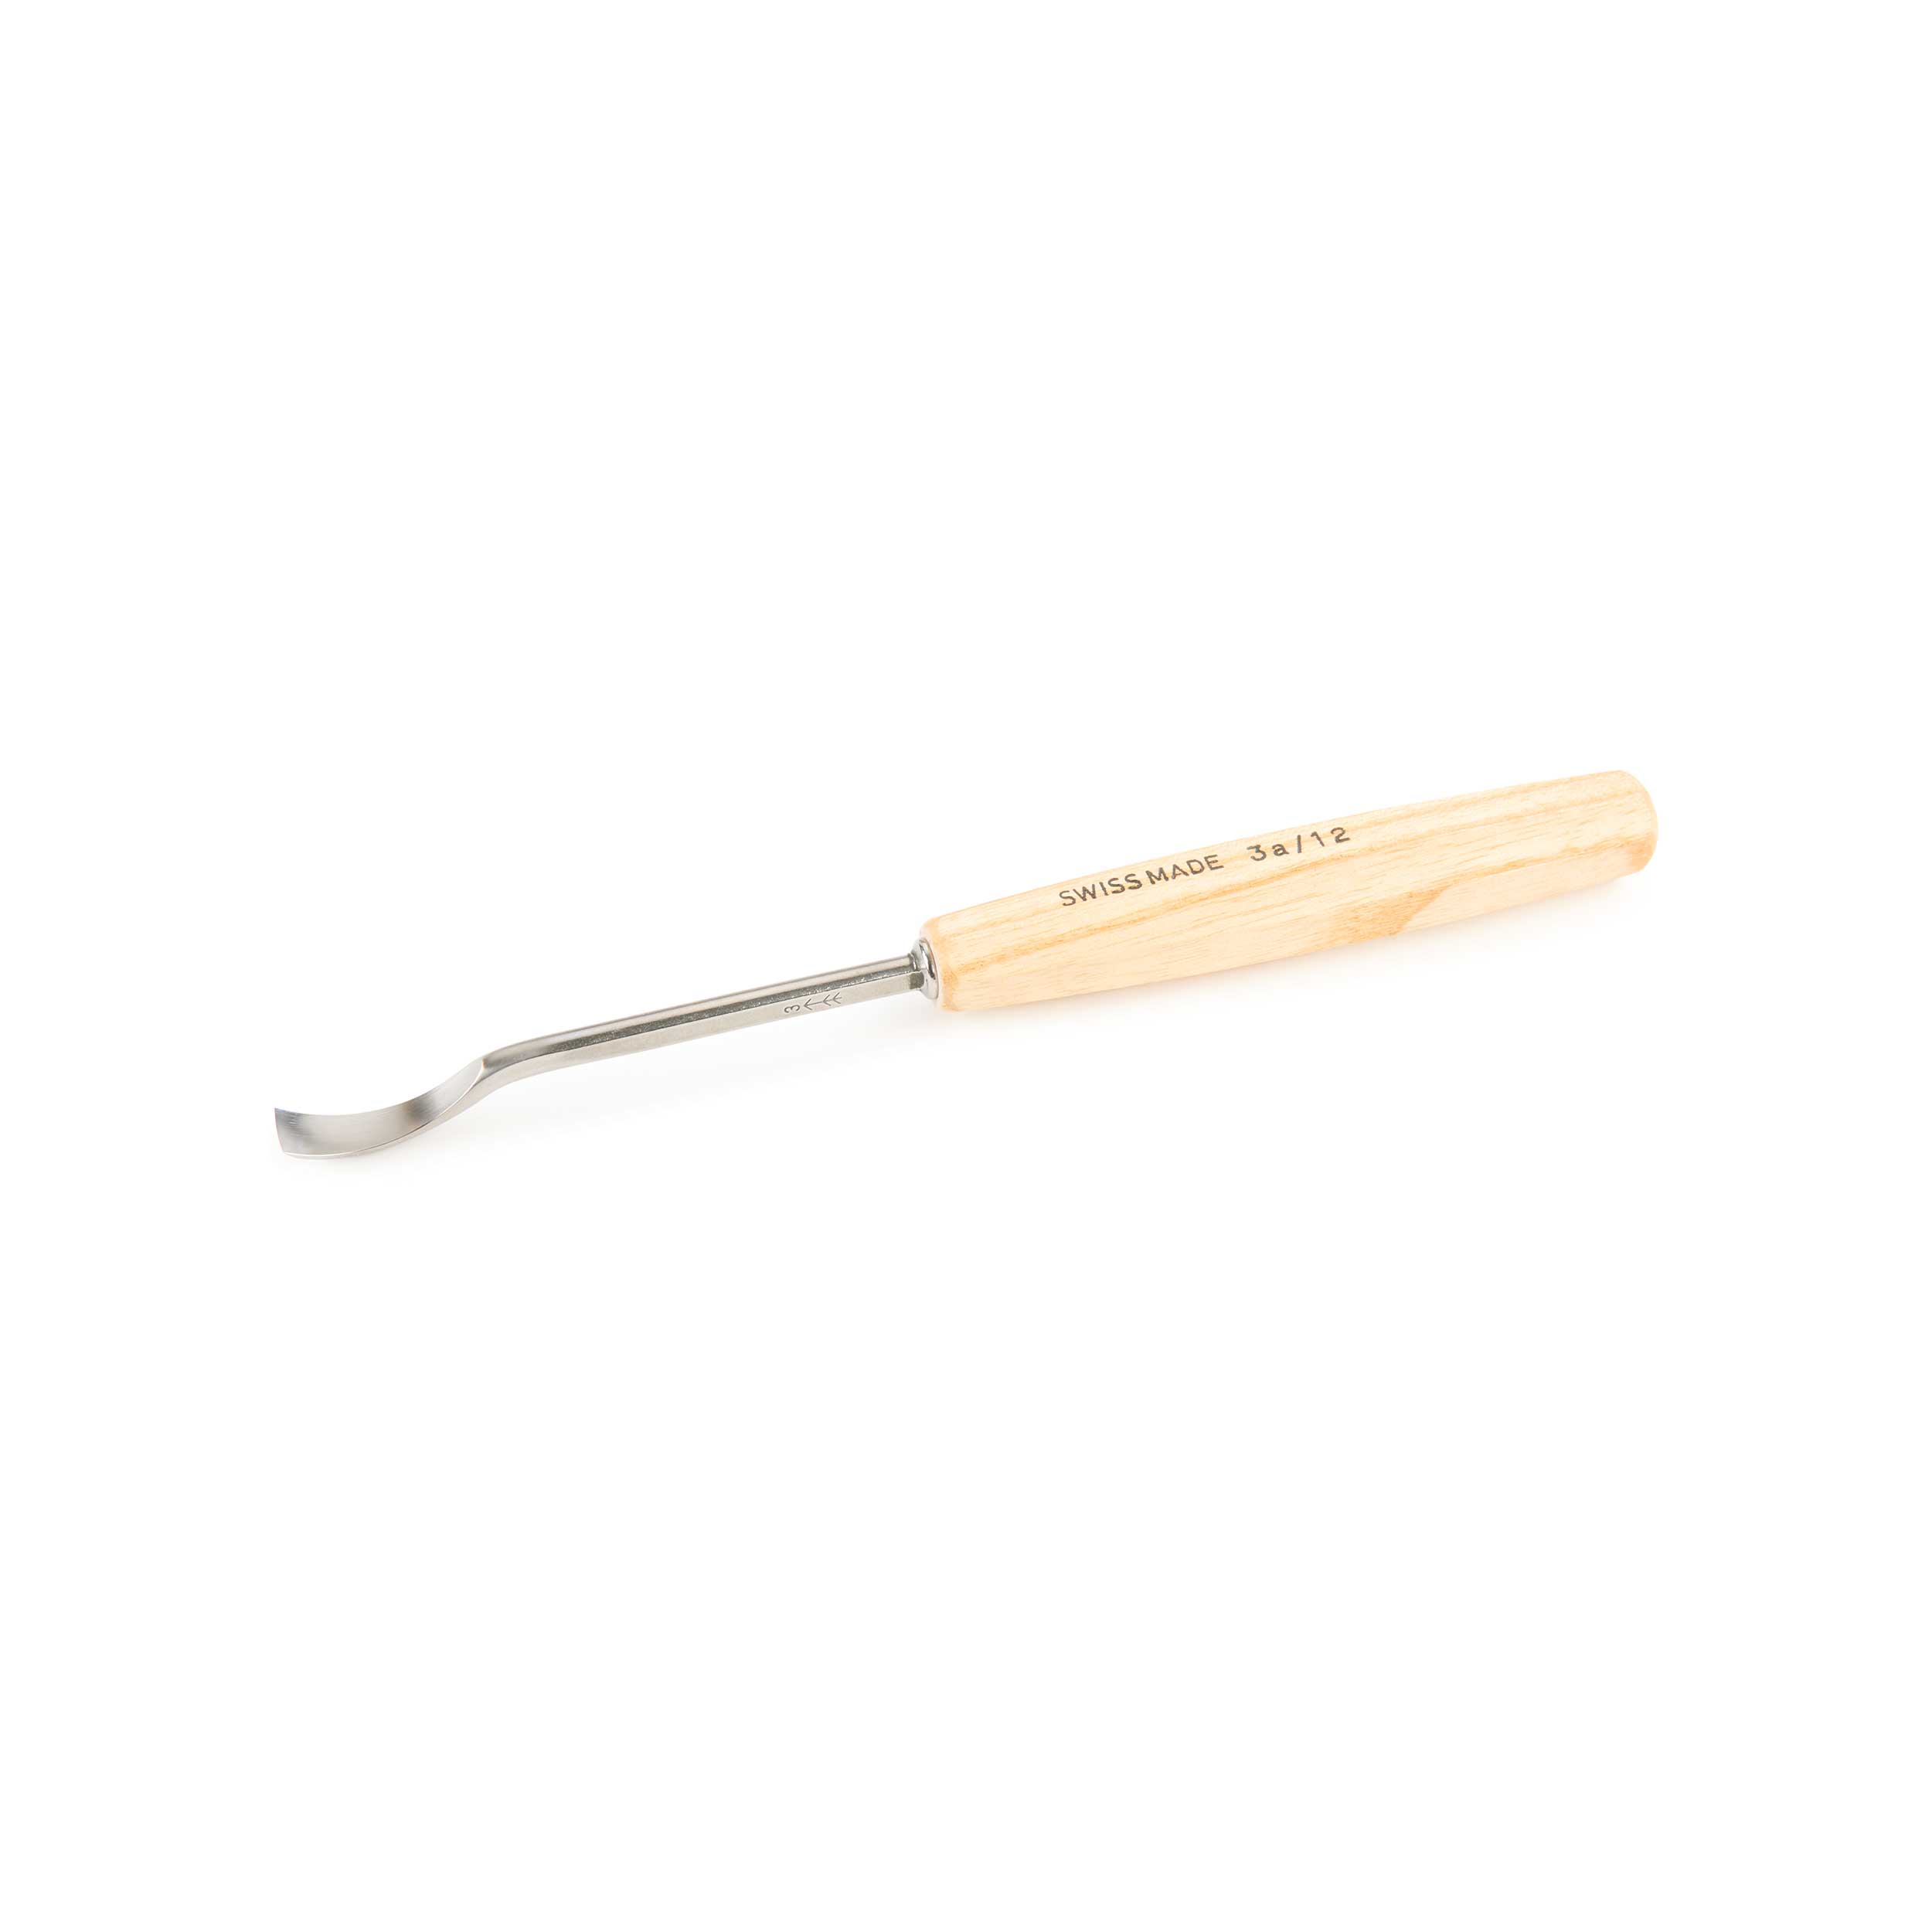 #3 Sweep Spoon Gouge 12 Mm, Full Size